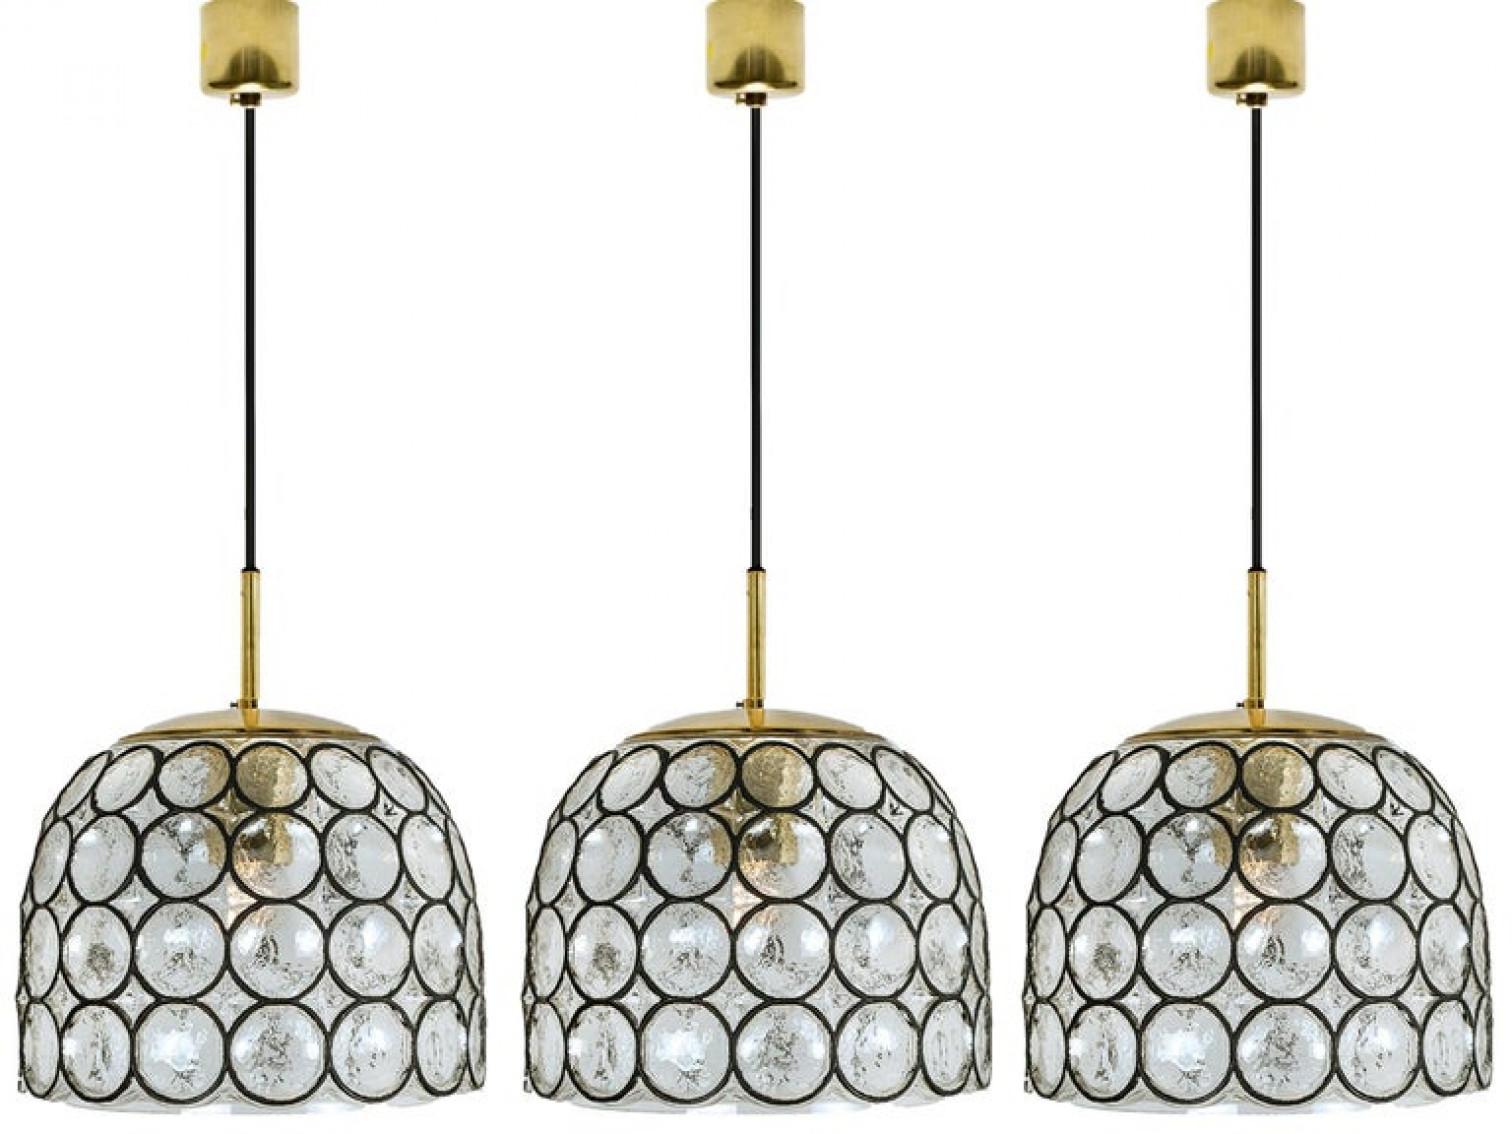 Minimal, geometric and simply shaped design. This beautiful and unique pair of hand blown glass chandeliers/pedant lights were manufactured by Glashütte Limburg in Germany during the 1960s (late 1960s or early 1970s). Beautiful craftsmanship. These